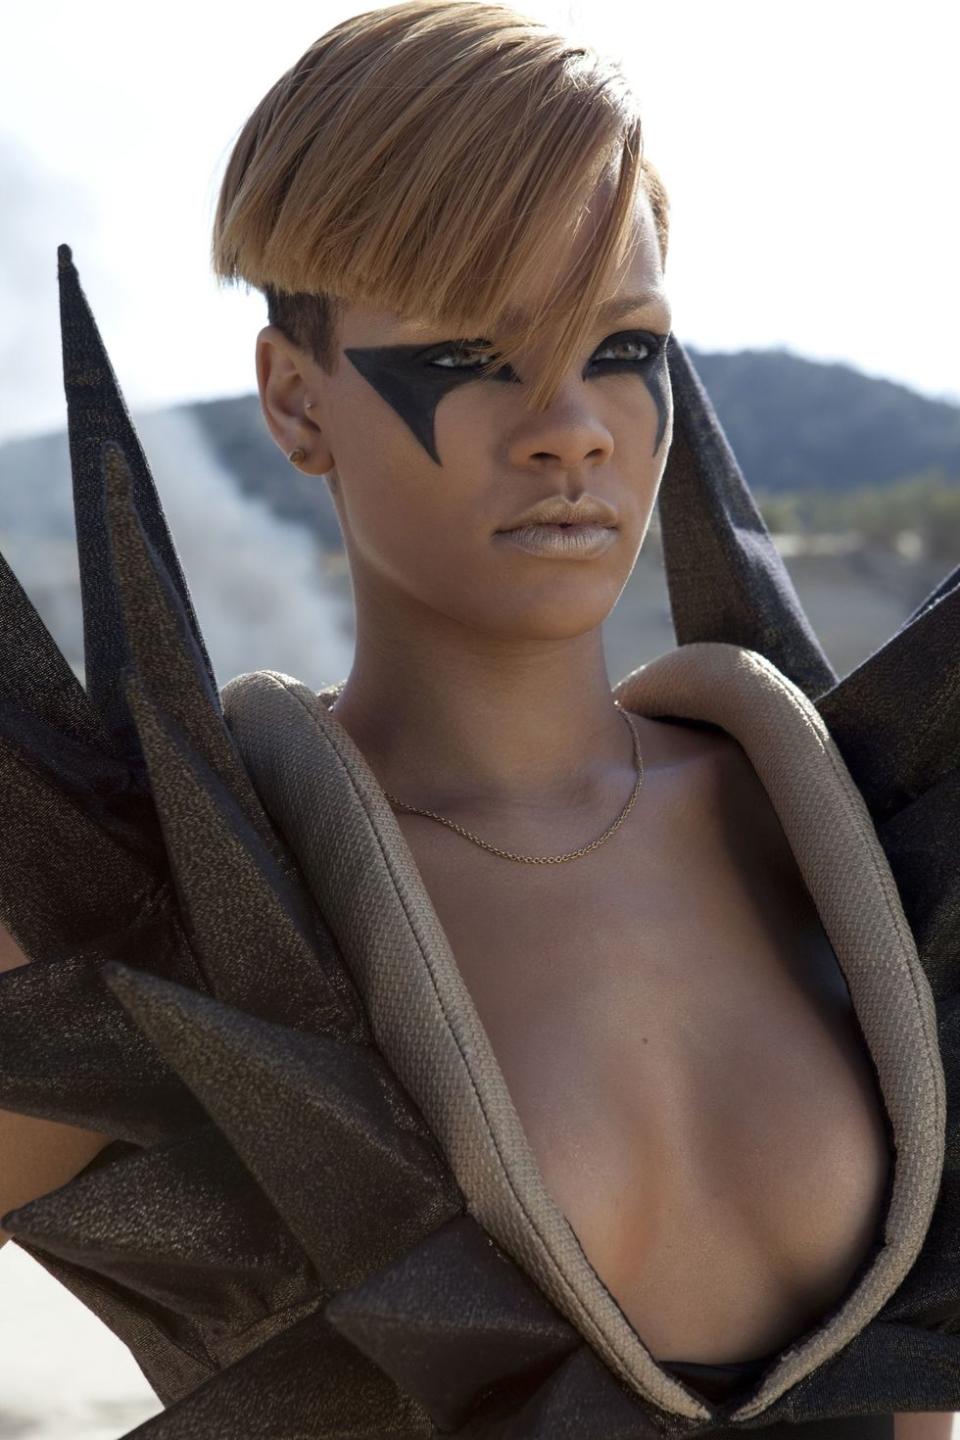 “It’s couture-military. Everything is surrounded by the whole idea of something military,” Rihanna explained to MTV of the composition of the “Hard” music video. “We have tanks, we have troops, we’ve got helicopters, we’ve got explosions. Tight gear, lots of cute outfits, lots of bullets. Crazy.”